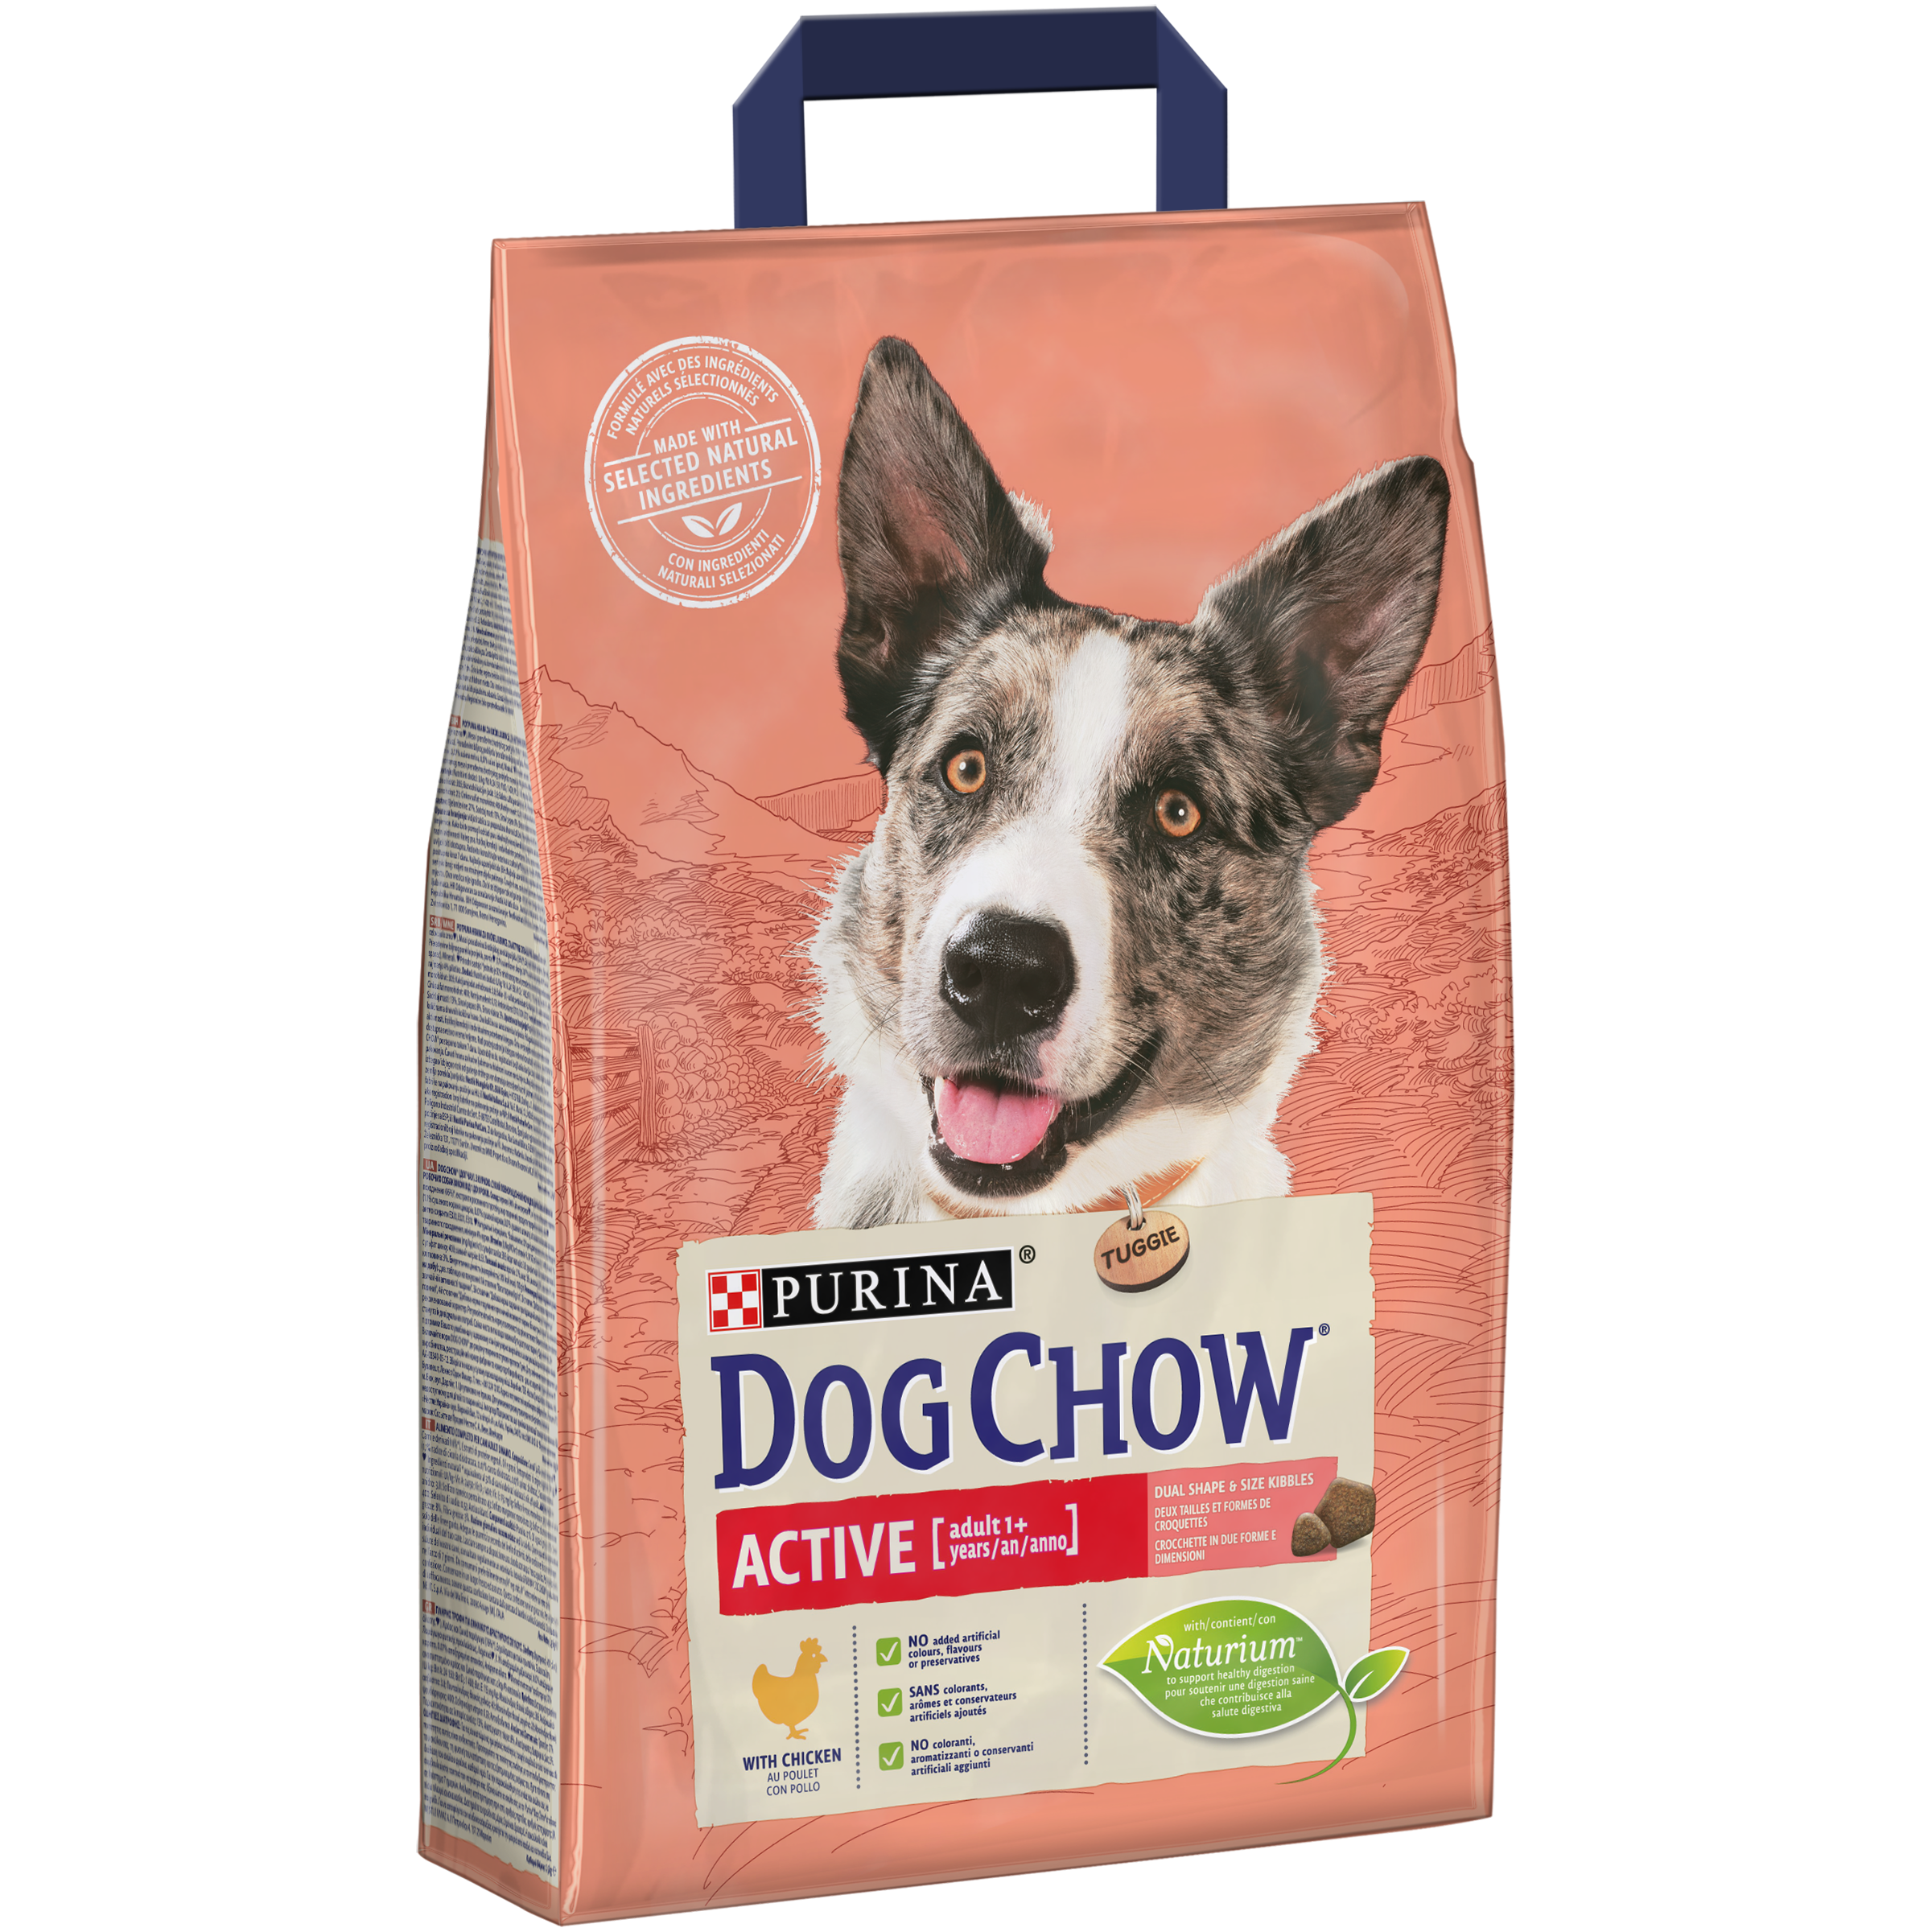 DOG CHOW ACTIVE, Pui, 2.5 kg